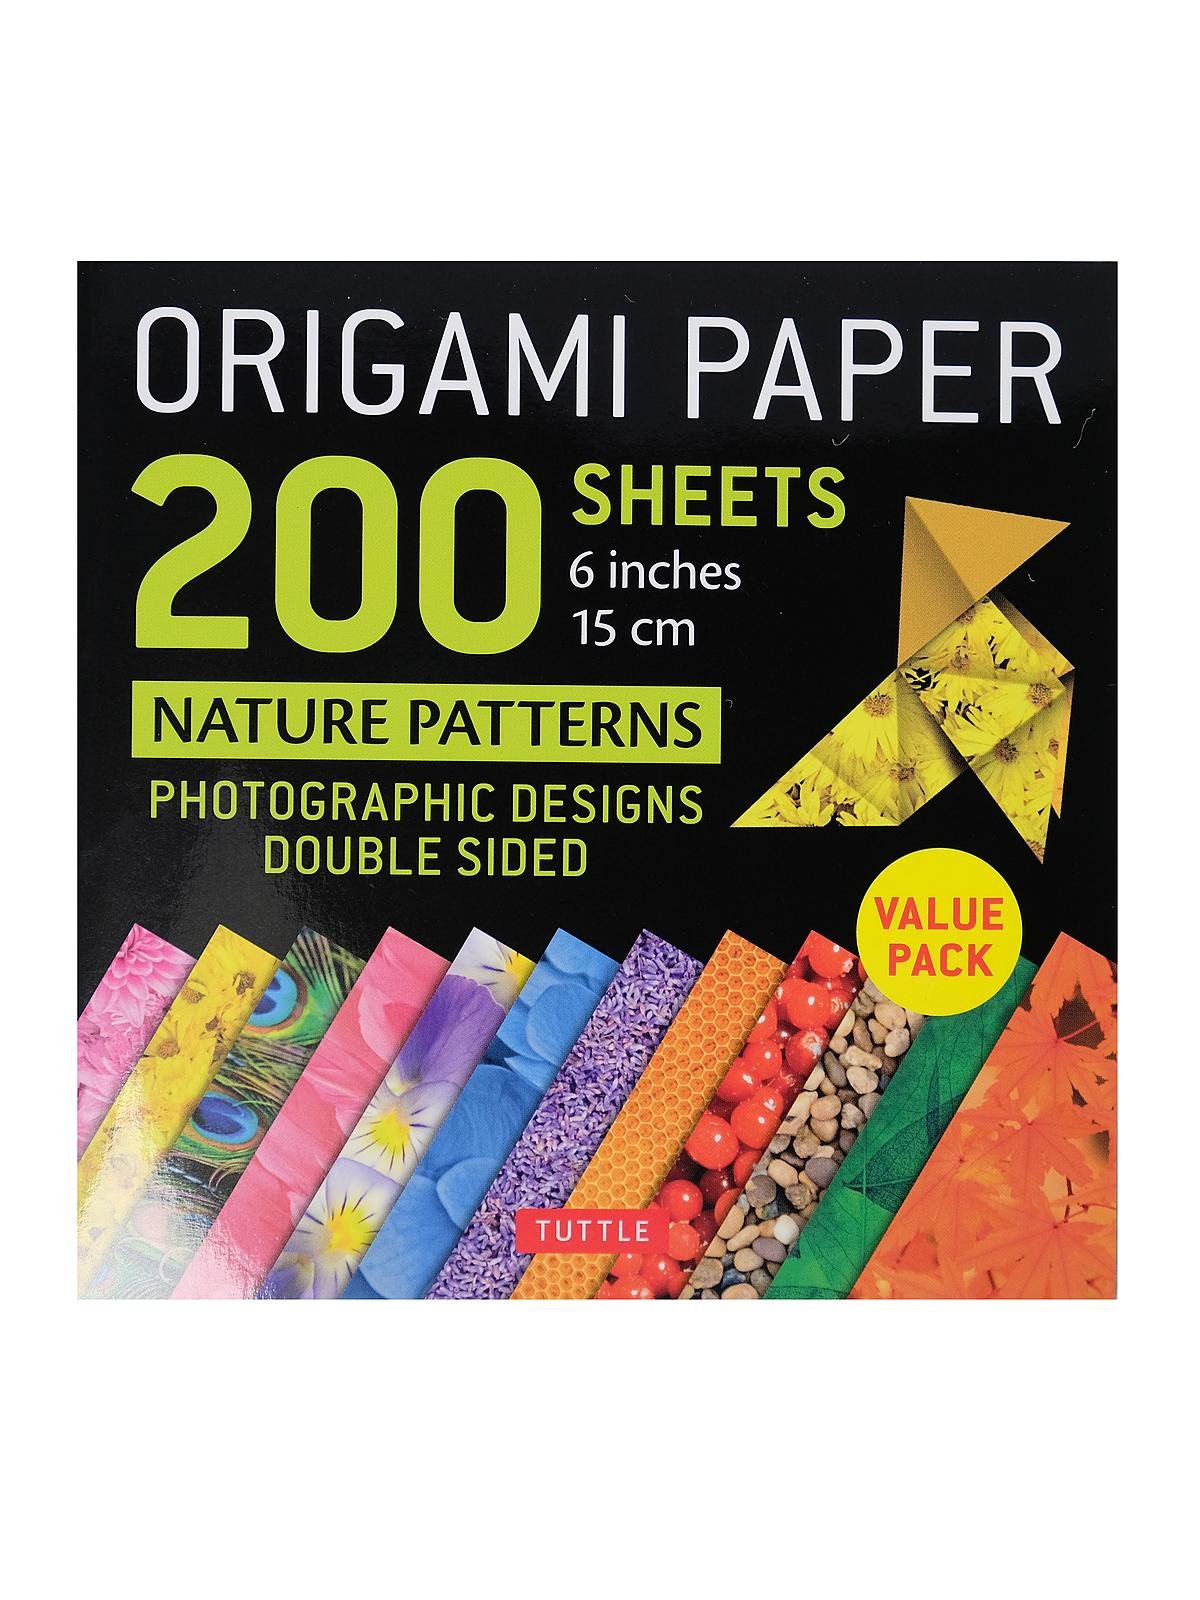 Origami Paper 100 Sheets Kimono Patterns 8 1/4 (21 Cm): Extra Large Double-Sided Origami Sheets Printed with 12 Different Patterns (Instructions for 5 Projects Included)